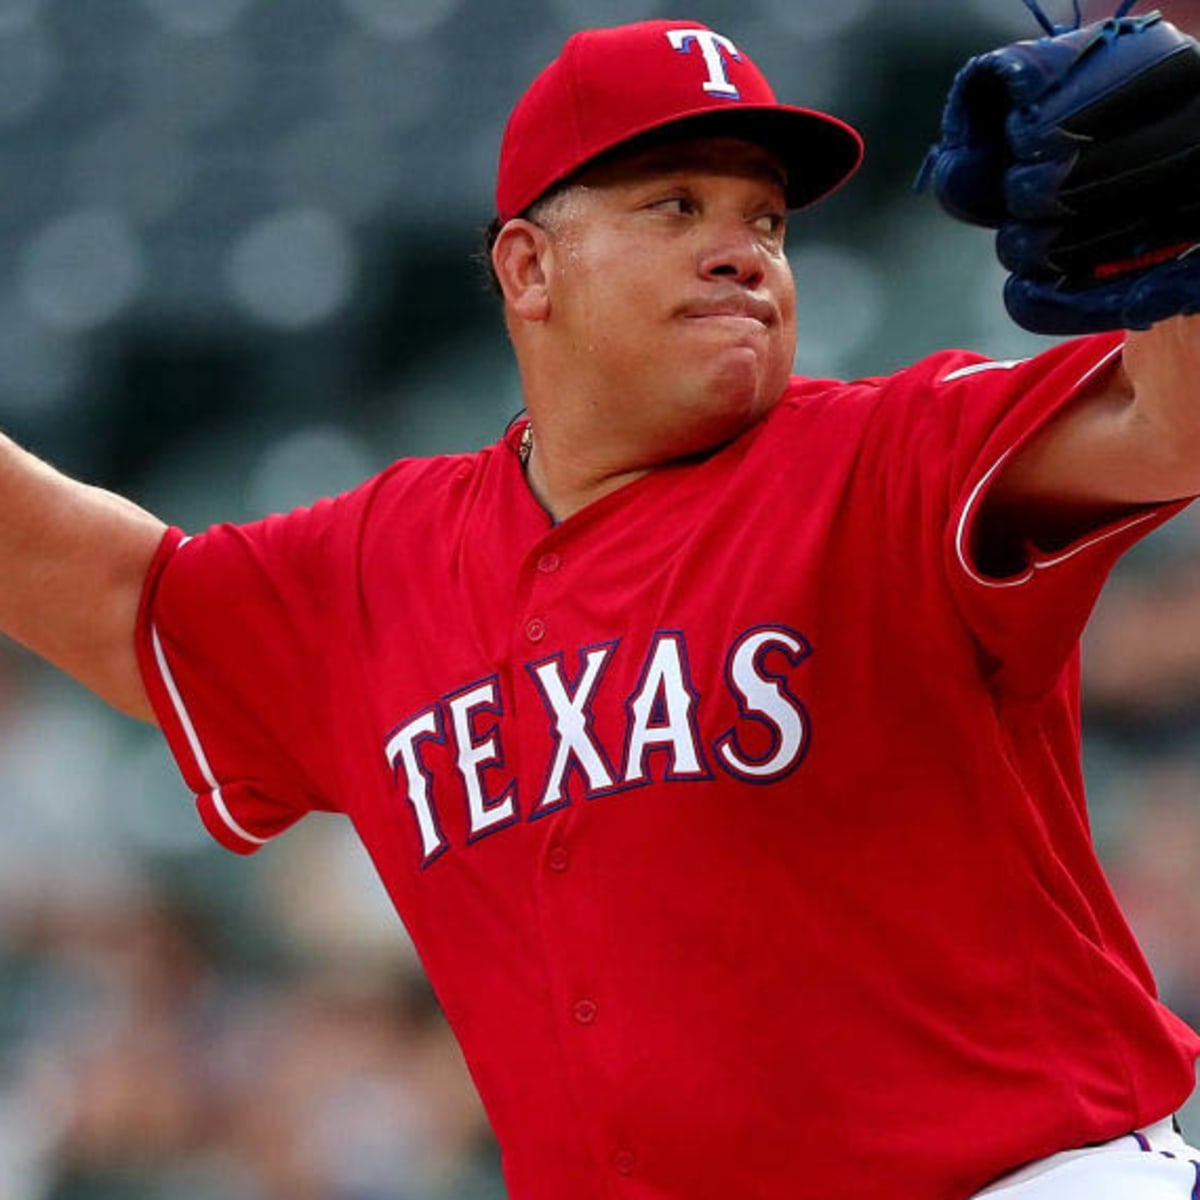 46-year-old Bartolo Colon wants to pitch for Mets again